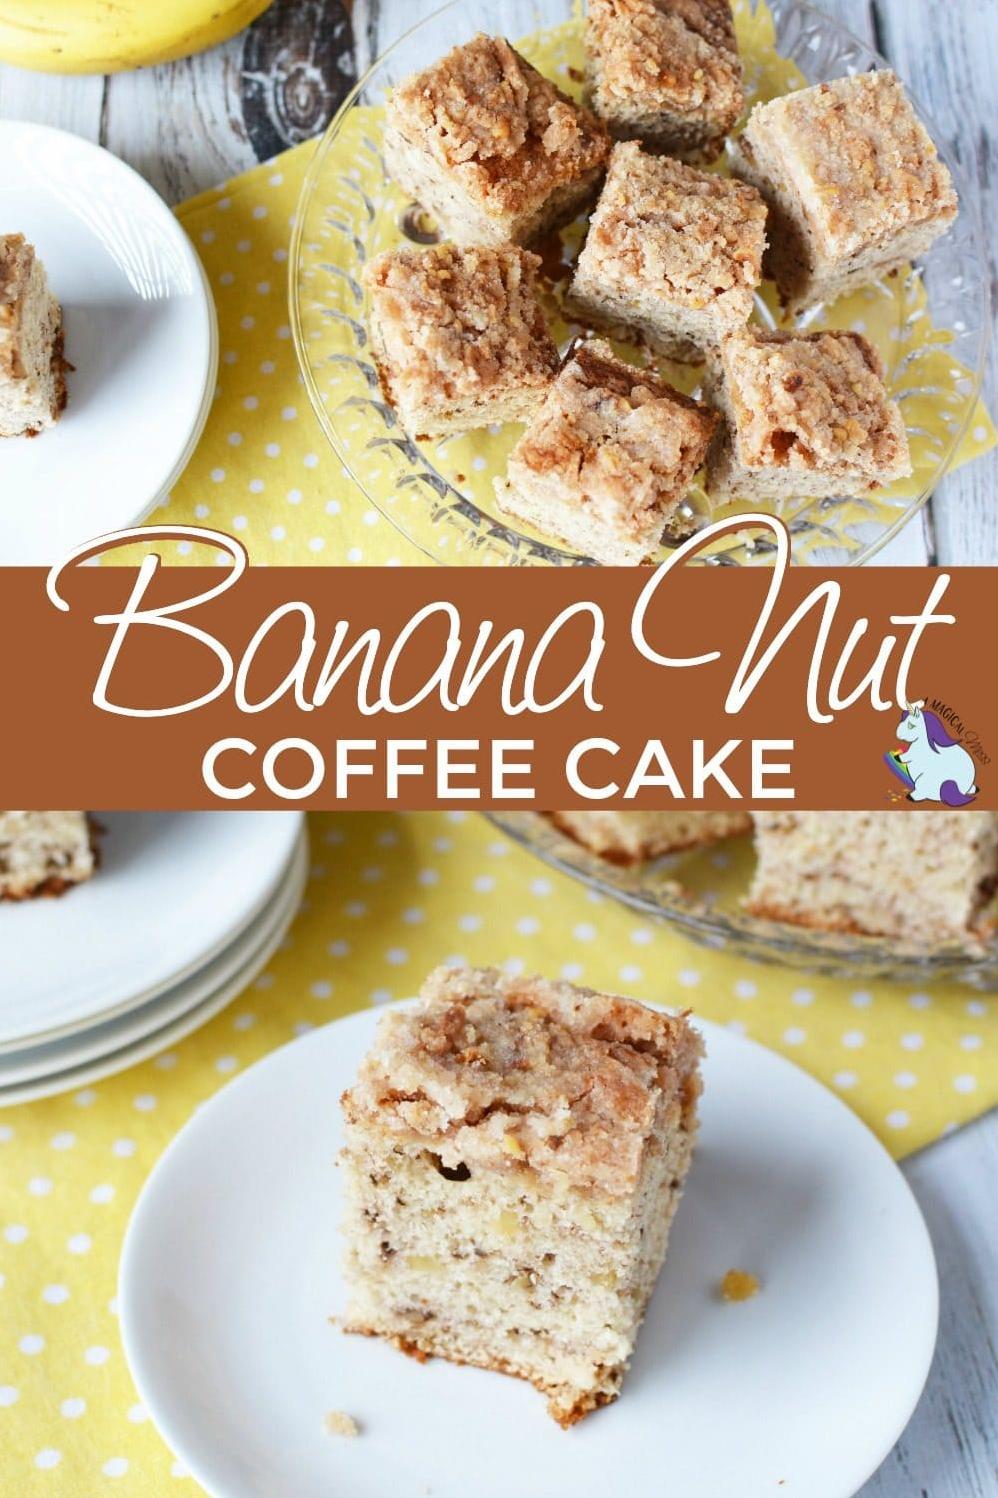  The perfect slice of coffee cake for your morning brew